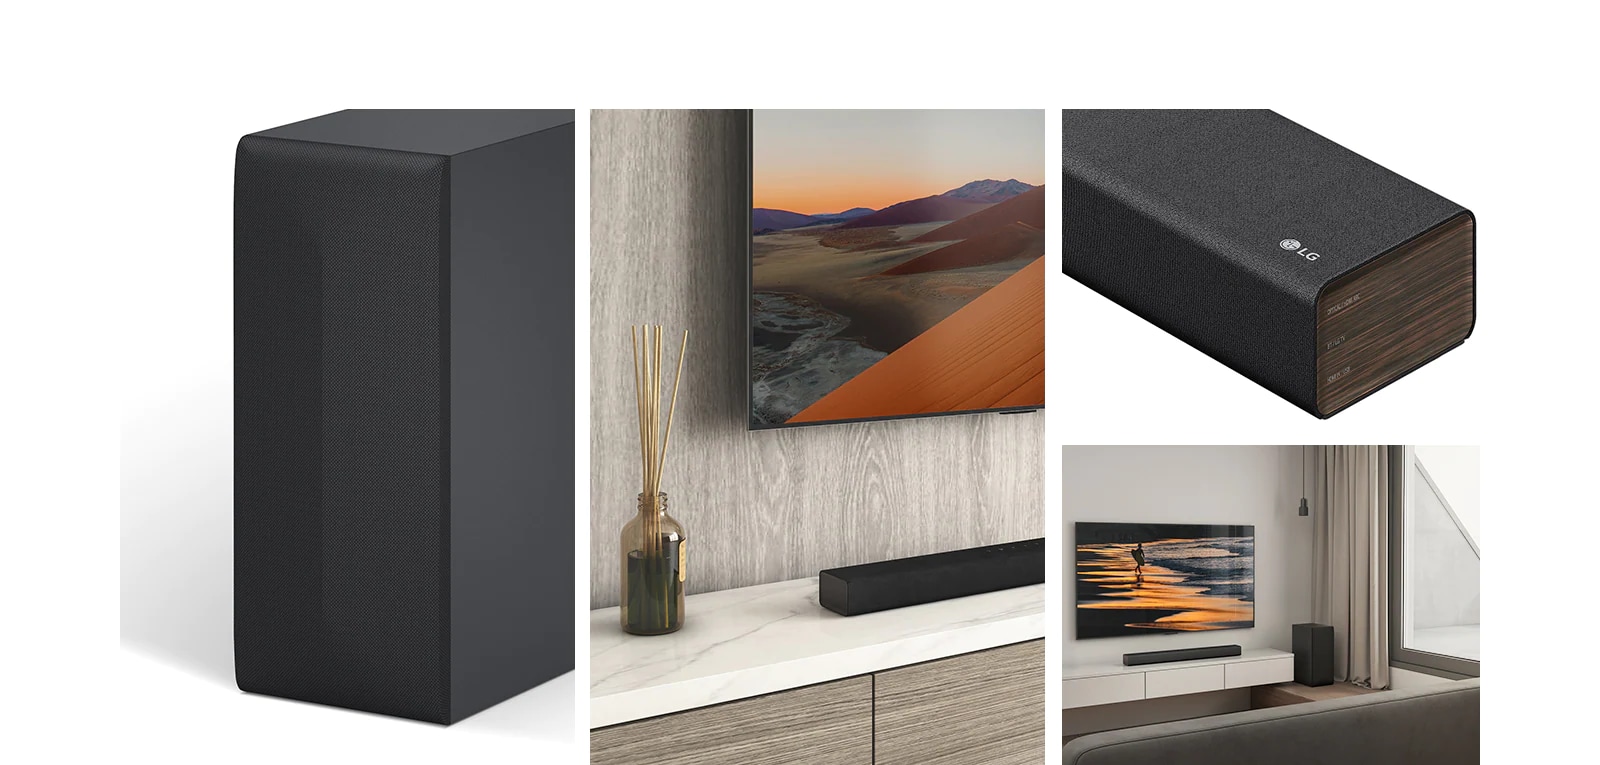 From left, an image of rear speaker, Close up of LG TV, showing the mountin on the screen and LG Sound Bar below. On the right, Clockwise from top-bottom: close-up of LG Sound Bar. LG TV, showing a beach at sunset, and LG Sound Bar, rear speaker is placed in the living room.